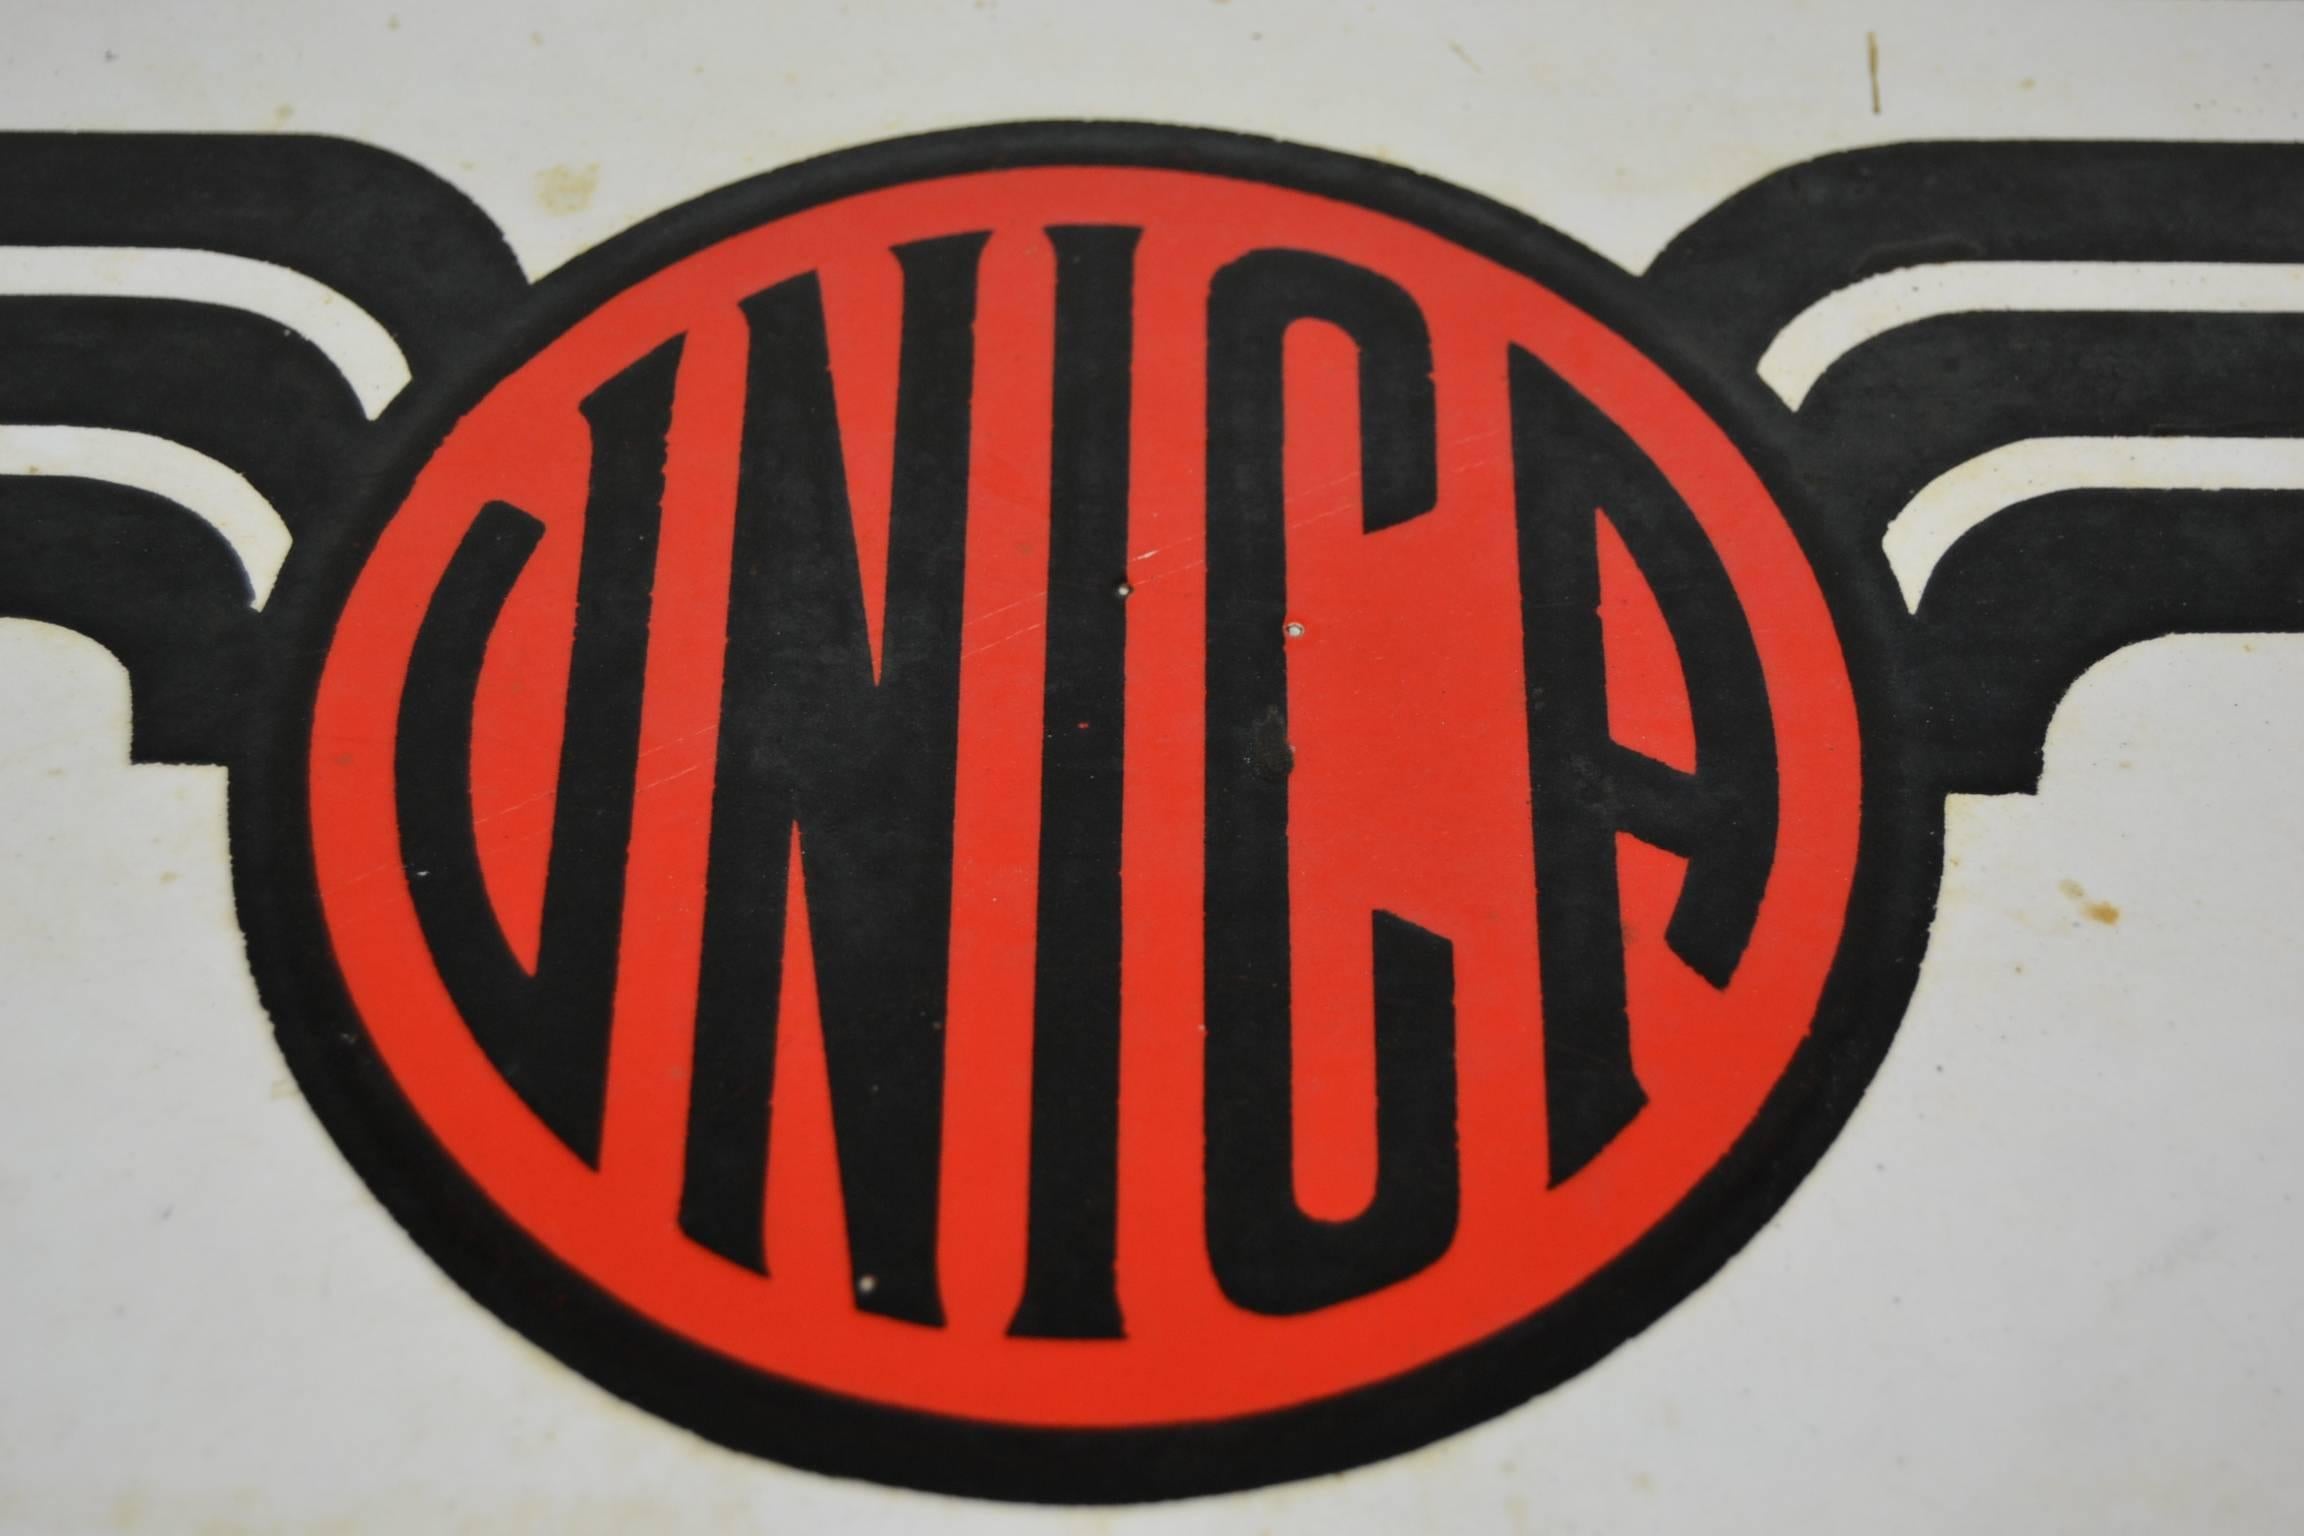 Vintage enamel sign for workshop Unica Brussels, Jette (Belgium)
This square enameled metal sign from 1947 has a beautiful design and use of letters
and is made by the Company Foremail - Bruxelles - Brussels.
Combination red, blue and